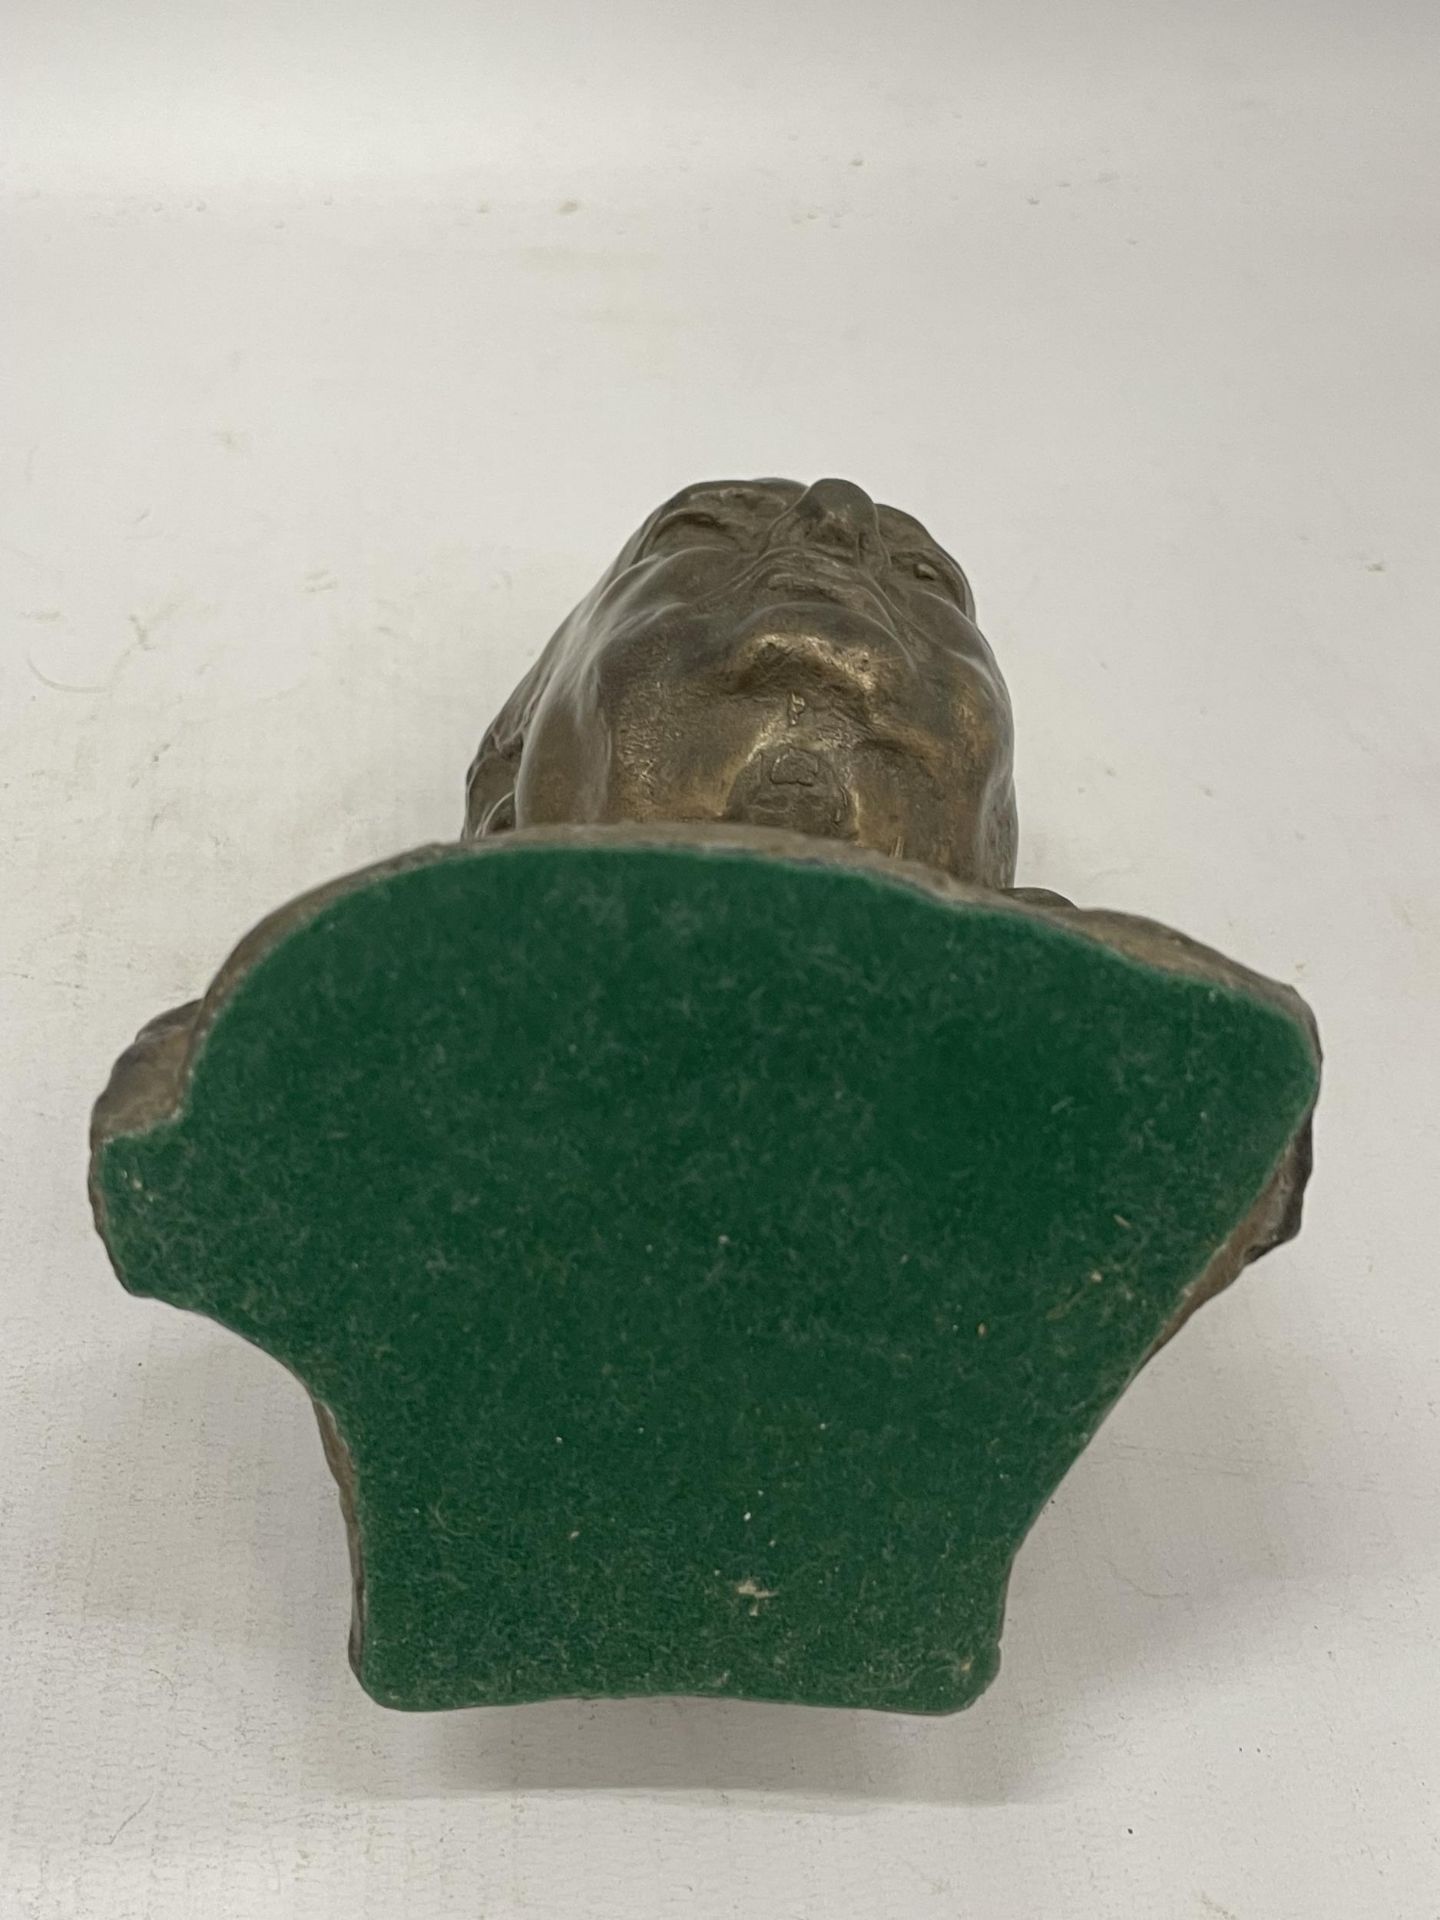 A BRONZED BUST OF WINSTON CHURCHILL - Image 4 of 4